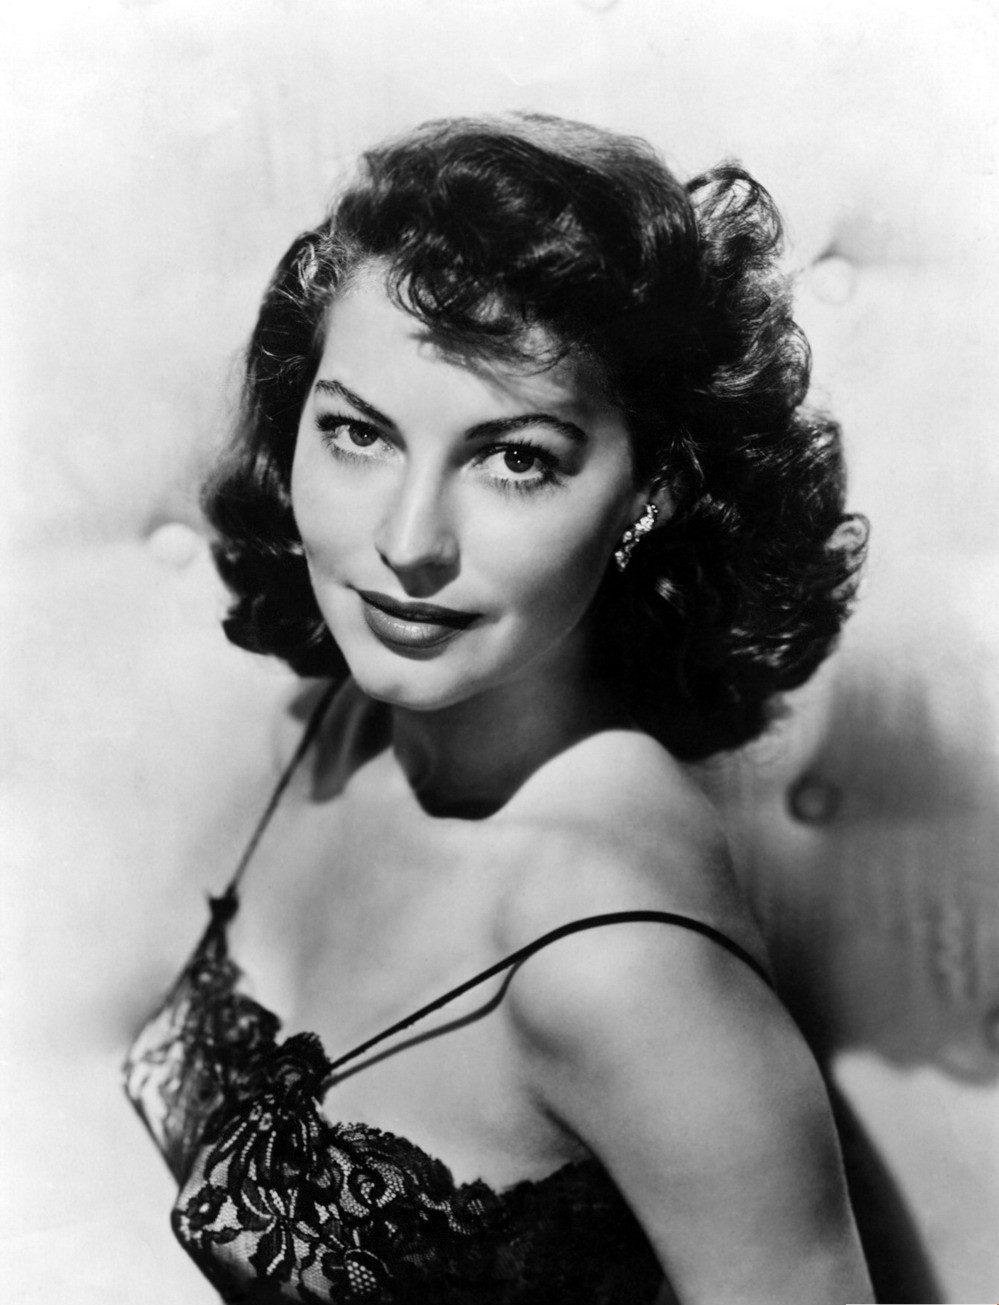 Ava Gardner photo gallery - page #6 | Celebs-Place.com